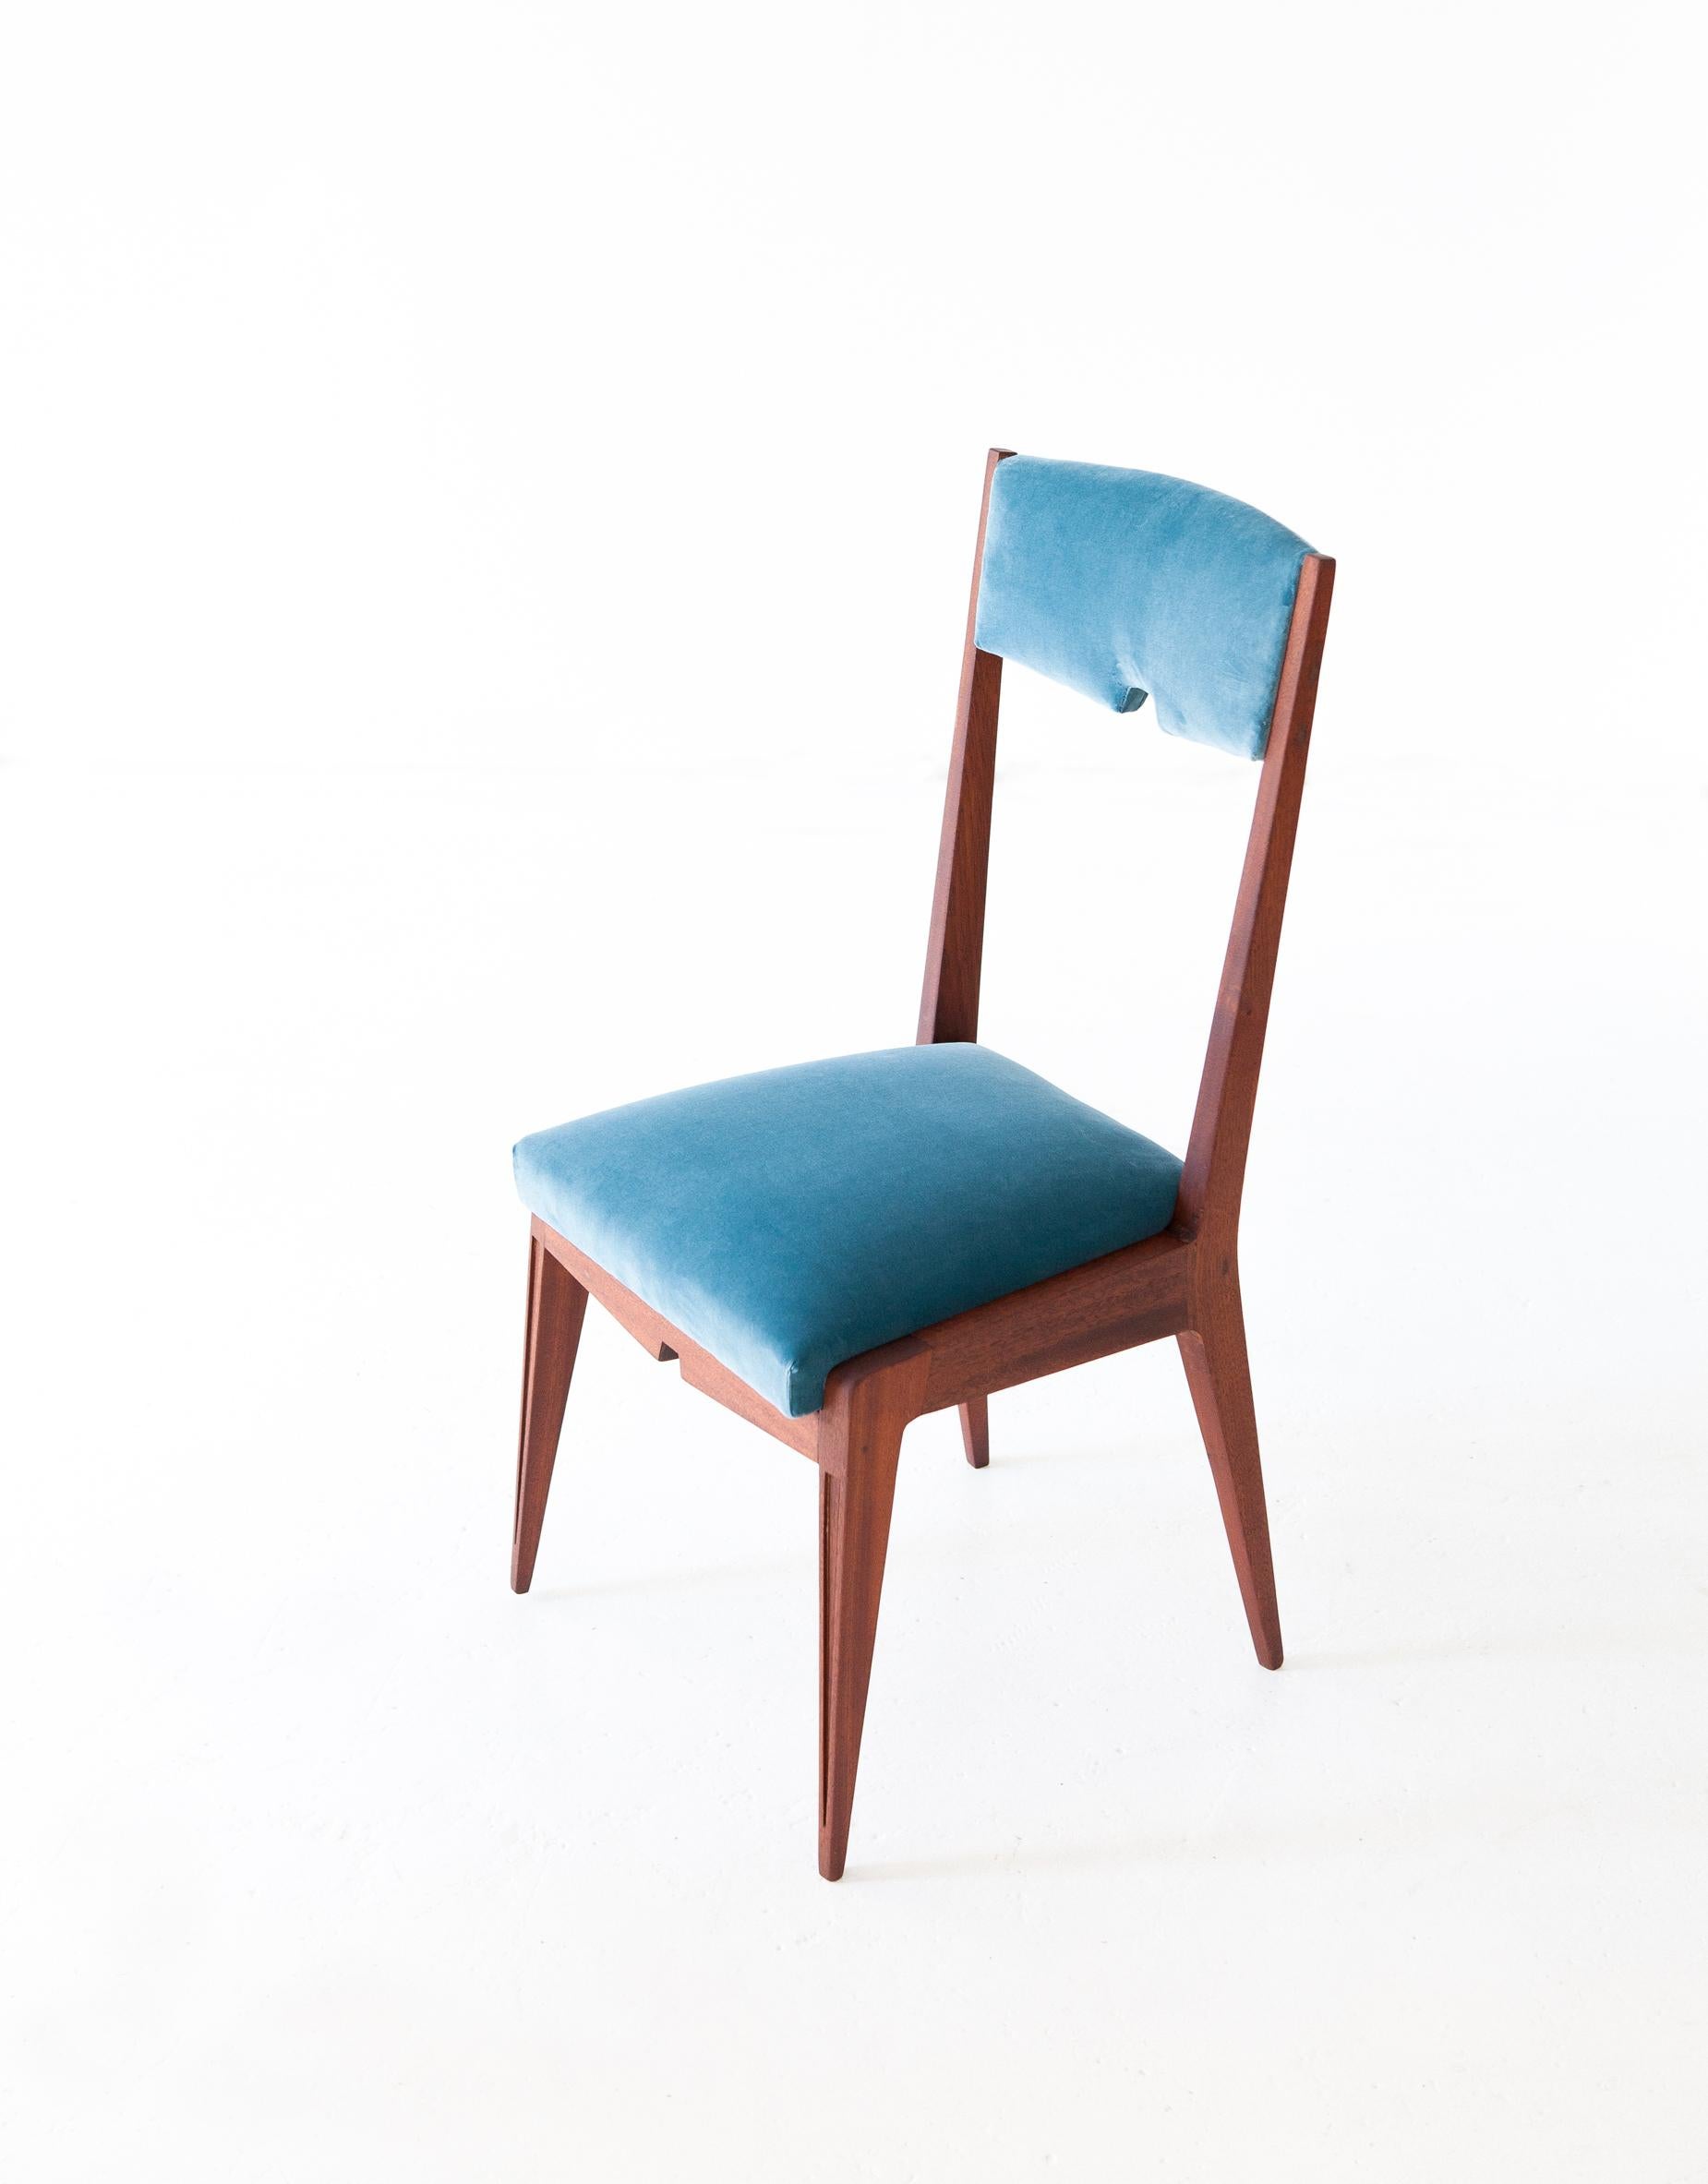 Set of six-light blue velvet and mahogany dining chairs, manufactured in Italy during the 1950s

Completely restored:

The frame is made of solid and high quality mahogany wood, this is completely restored with a deep sanding, new gluing of all